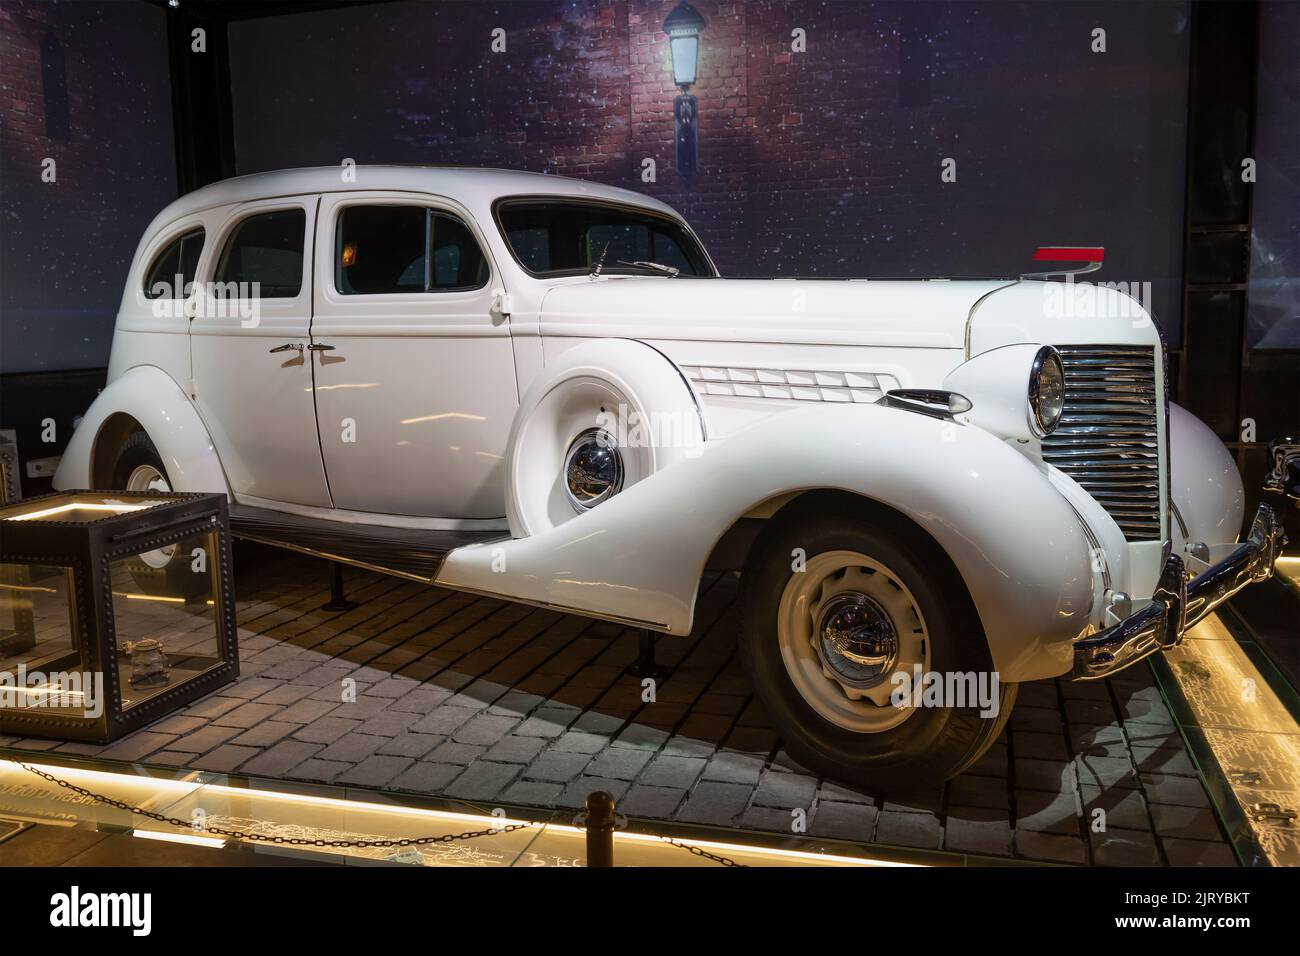 MOSCOW, RUSSIA - AUGUST 17, 2022: Soviet car ZIS-101A 1941 of release. This car served the top leadership of the Soviet Union. Exhibit of the Museum ' Stock Photo